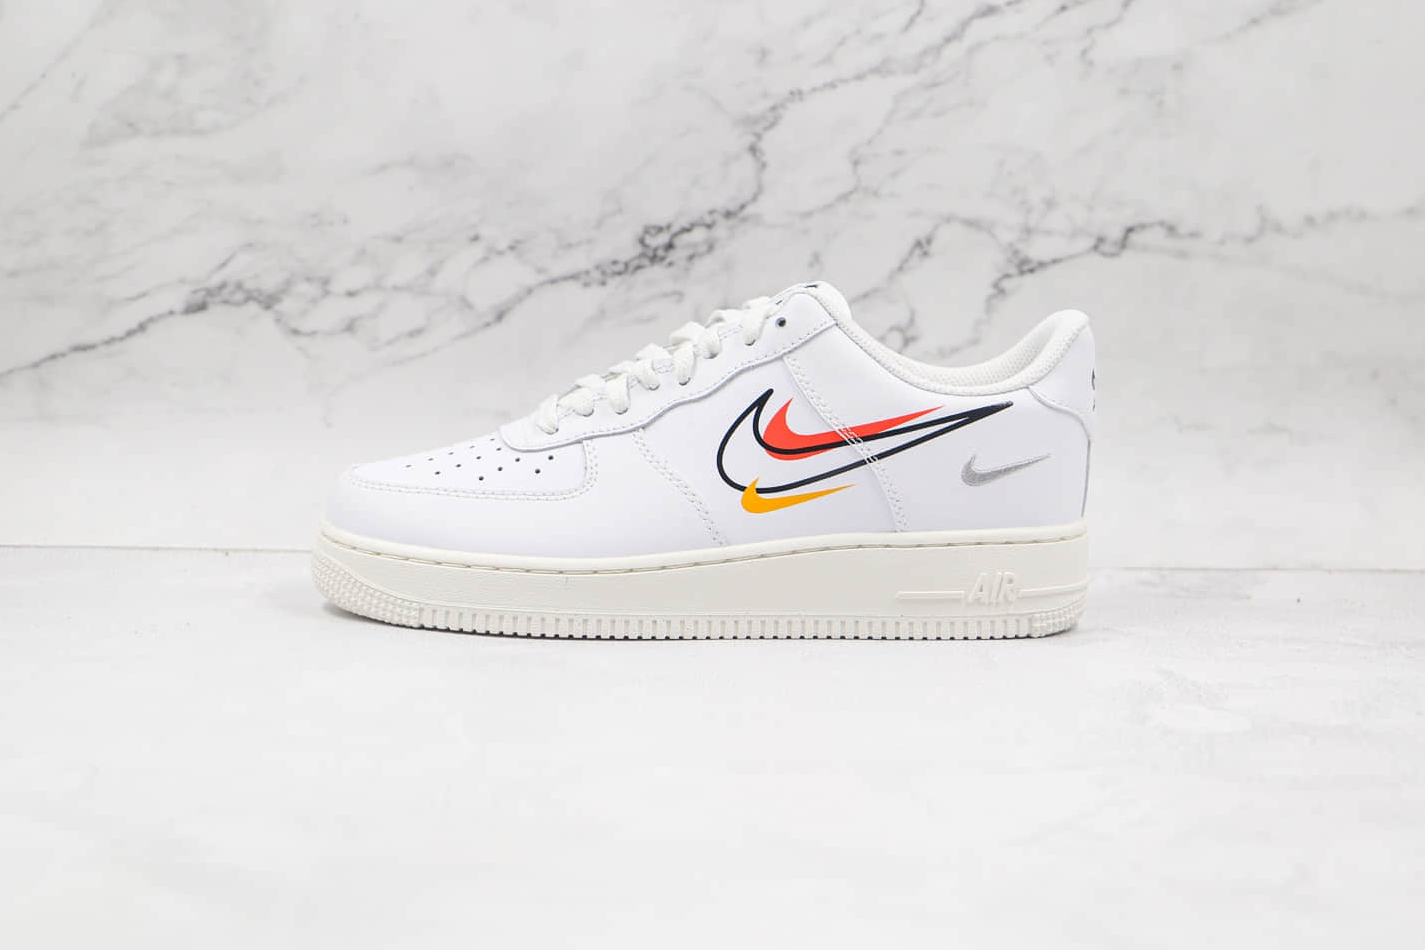 Nike Air Force 1 Low 'Multi-Swoosh Orange Yellow' DM9096-100 - Stylish and Bold Sneakers for Every Outfit